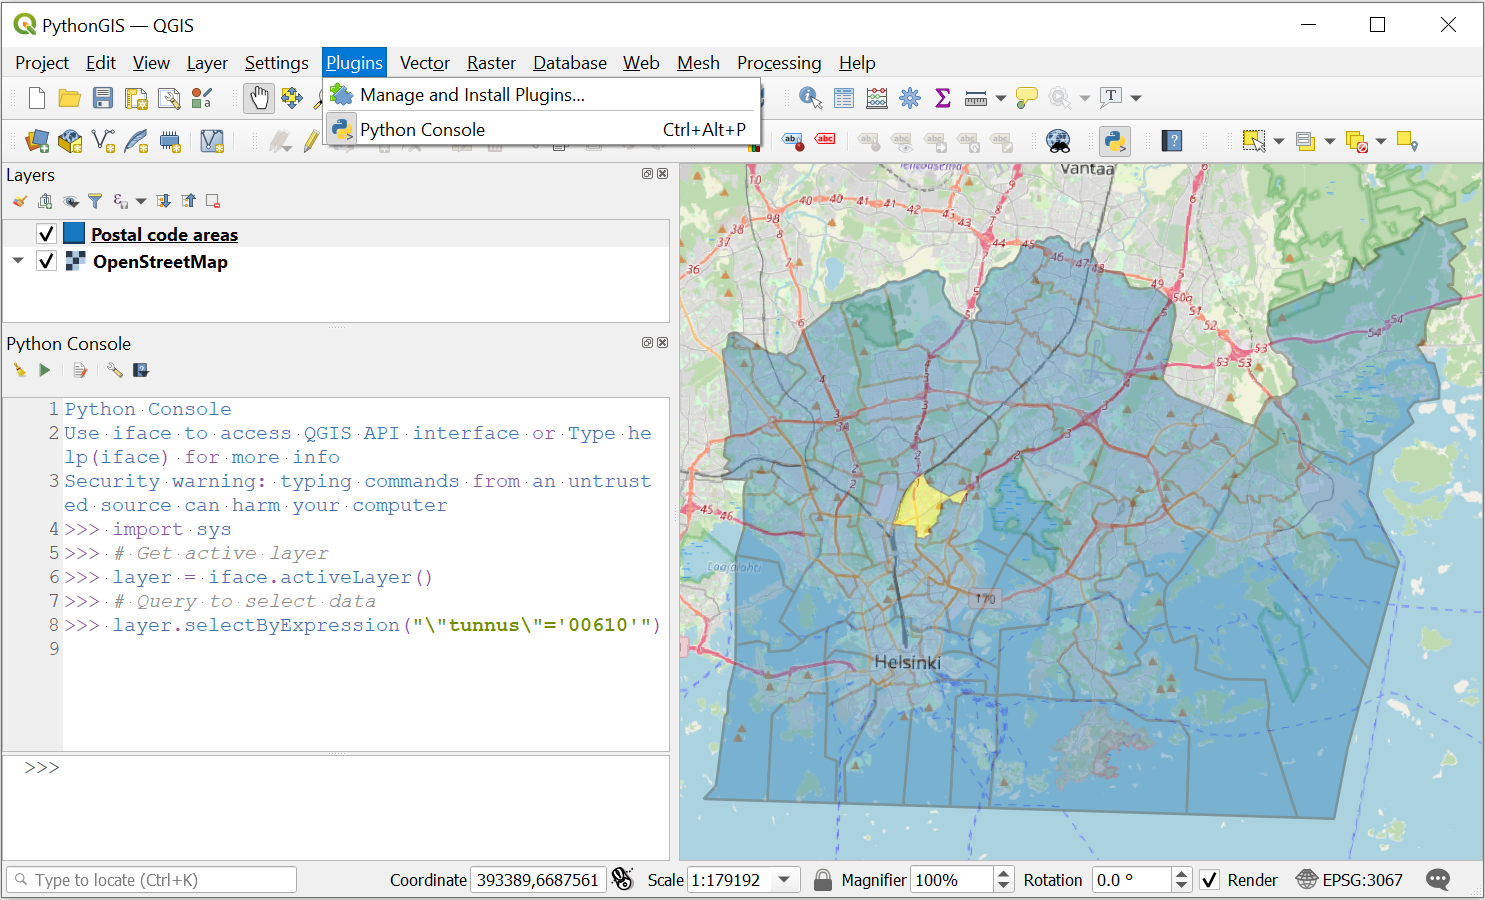 Figure 1.5. Using the Python console to interact with GIS data in the QGIS program (https://www.qgis.org/). Data sources: City of Helsinki 2022, OpenStreetMap Contributors 2022.